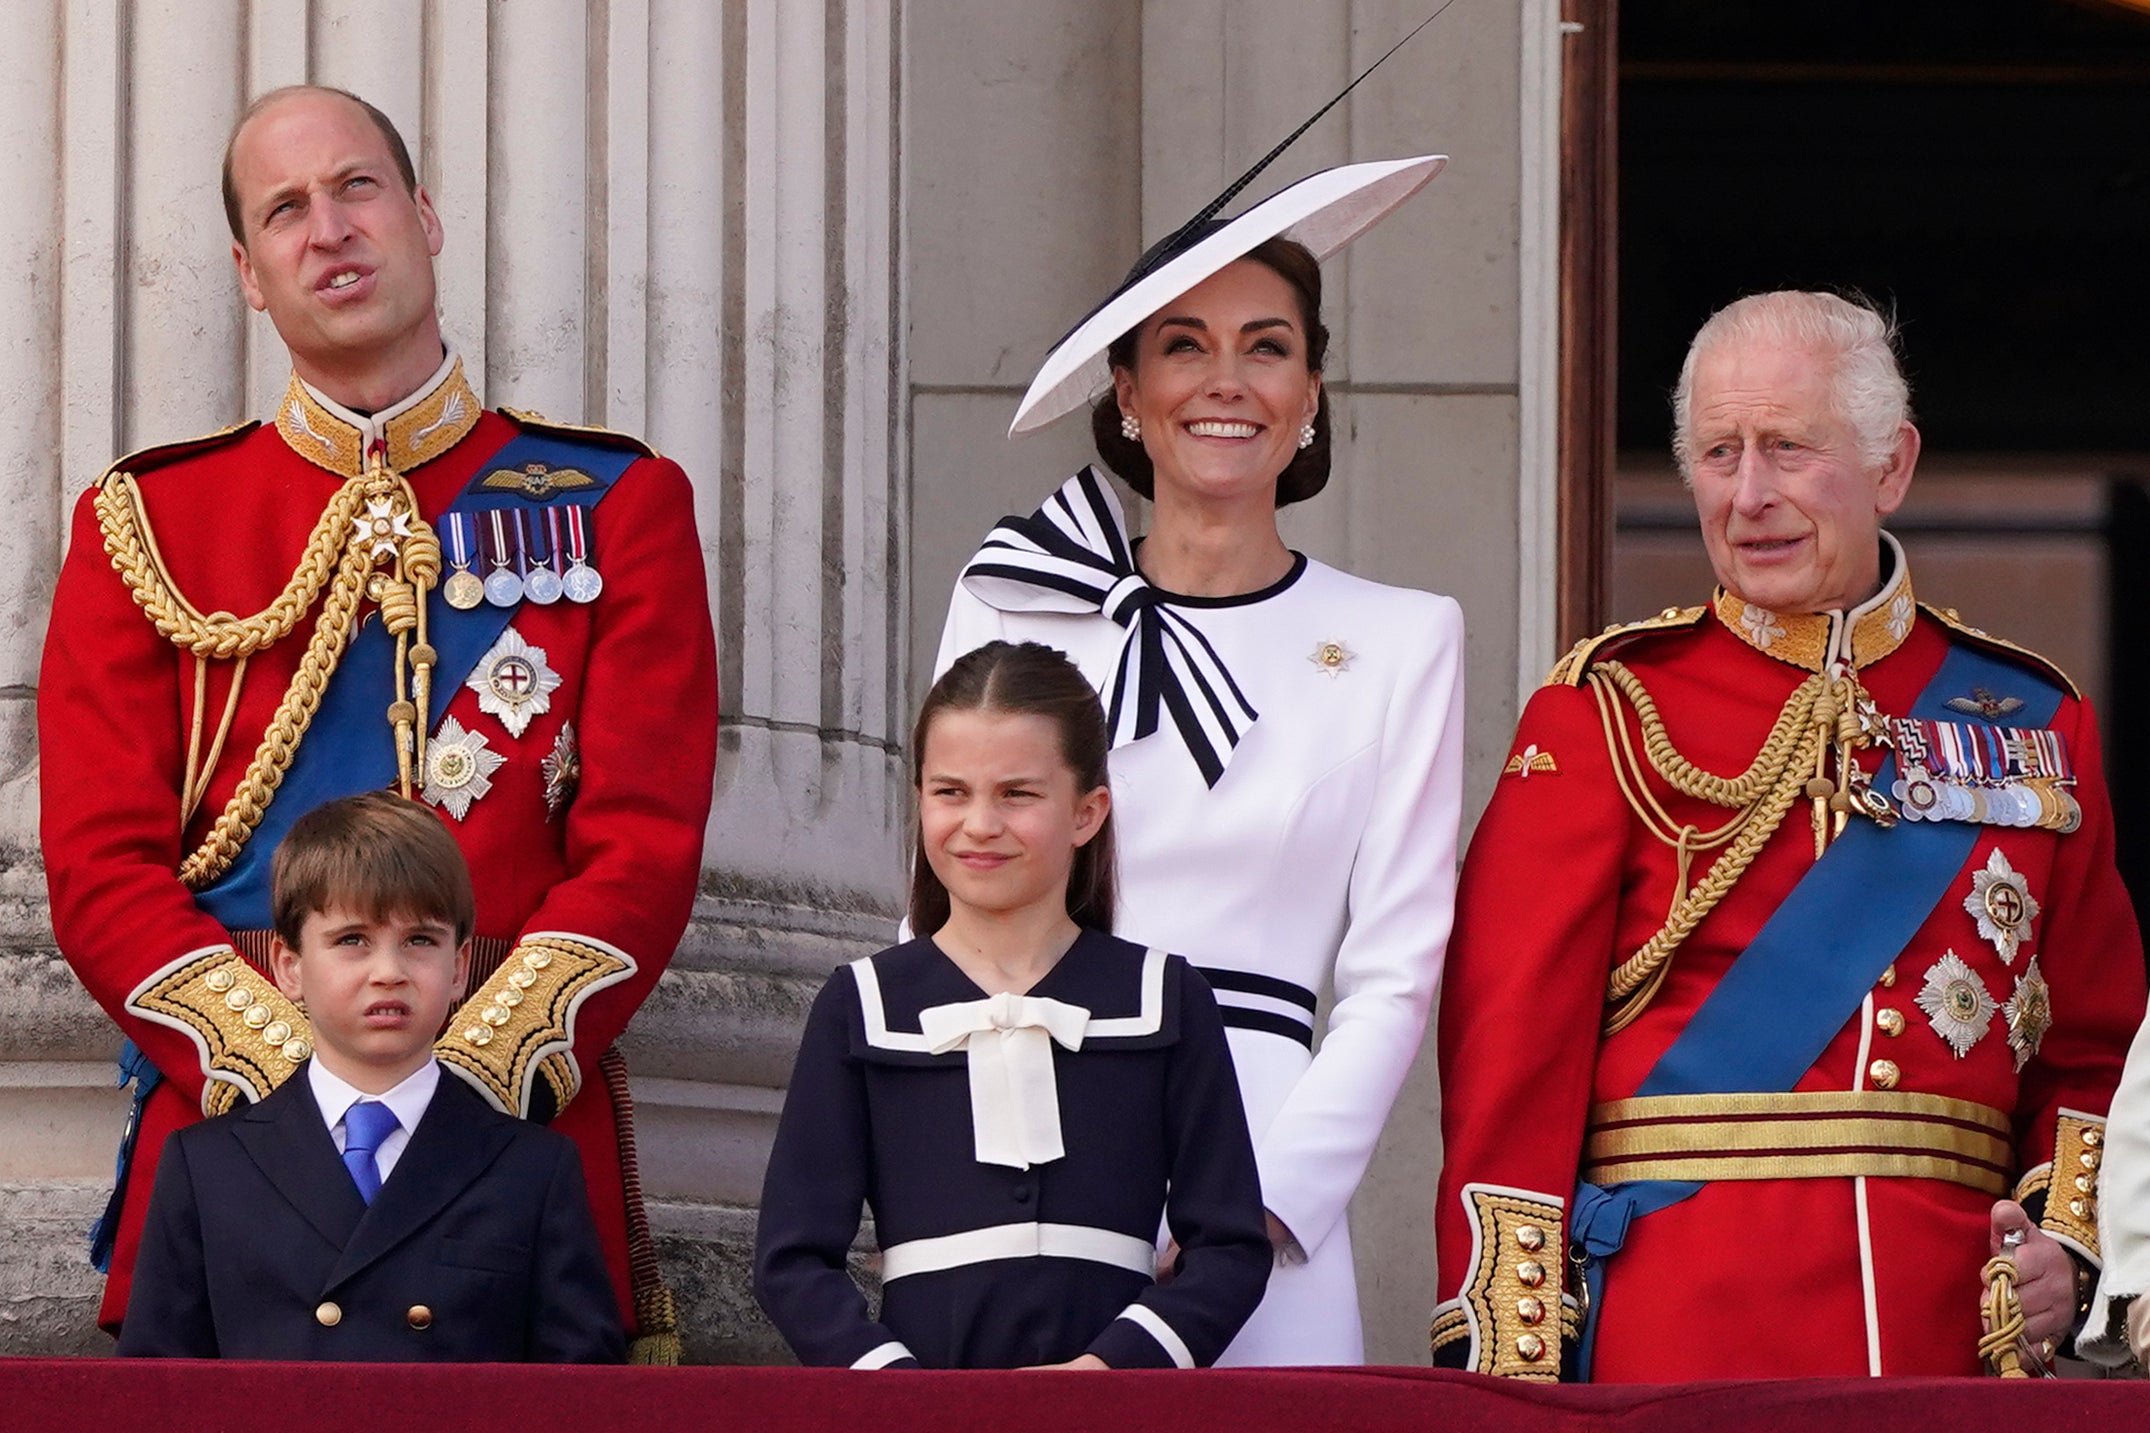 The princess made a welcome appearance at Trooping the Colour this month.